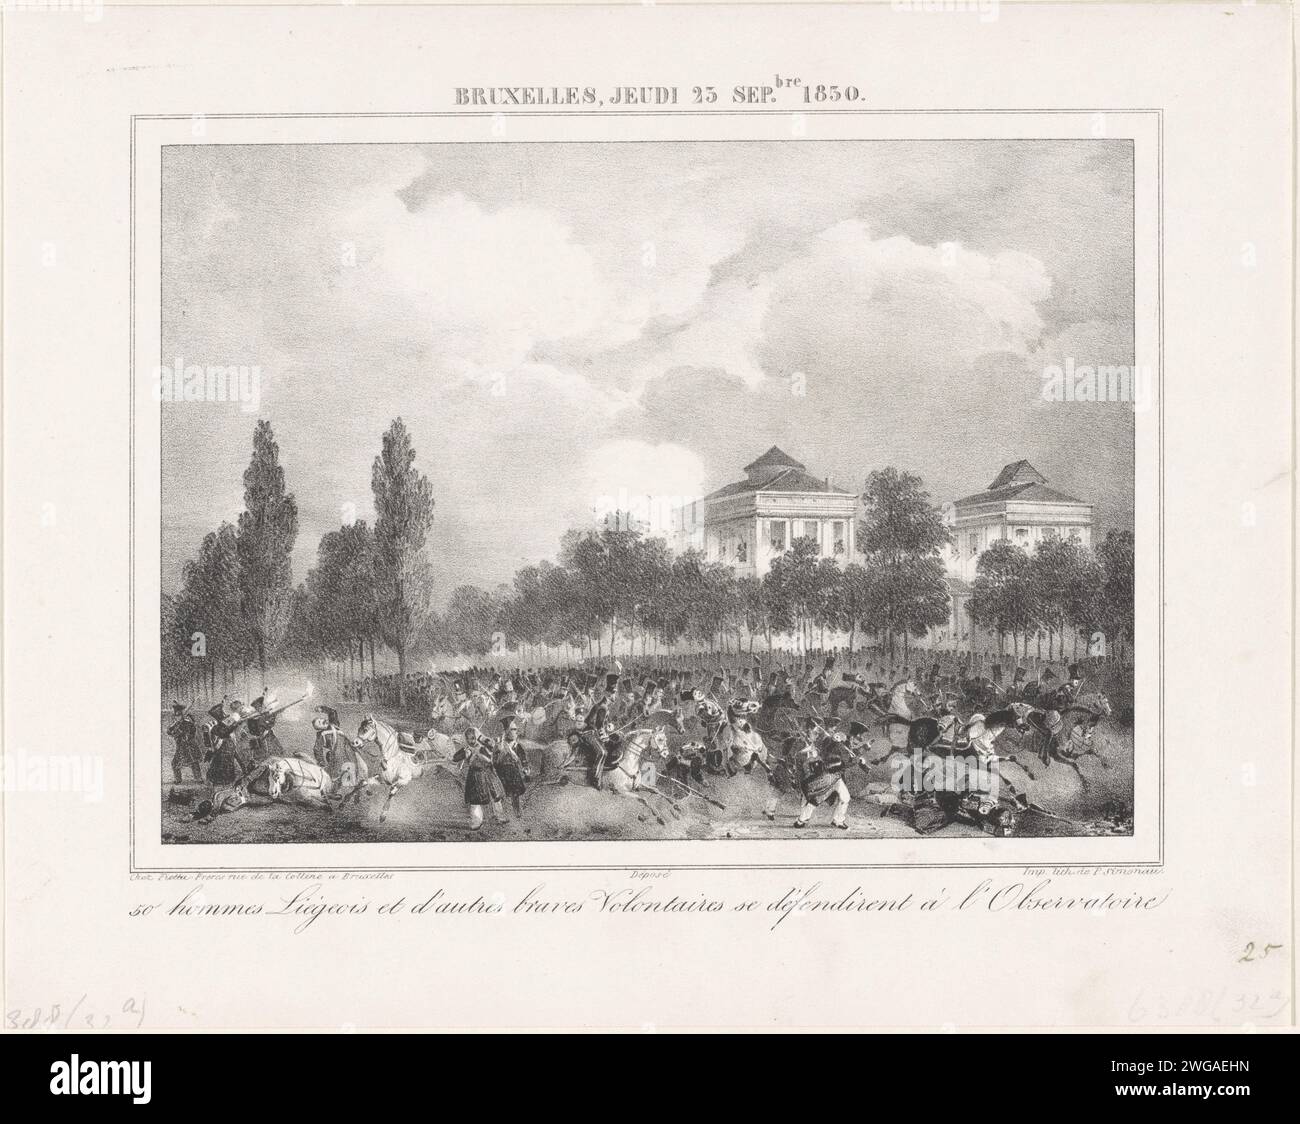 Fighting at the Observatory in Brussels, 1830, Pierre Simonau, 1830 - 1831 print 50 Liège men, together with other courageous volunteers, defend themselves against the Dutch troops at the observatory in the Warandepark in Brussels on September 23, 1830. Part of a group of prints from various other series related to the records in the Recueil about the events during the Belgian Revolution in Brussels, Antwerp and other cities in the period 25 August 1830 to 27 March 1831. Brussels paper  battle. observatory (~ astronomy) Brussels. Wara -park Stock Photo